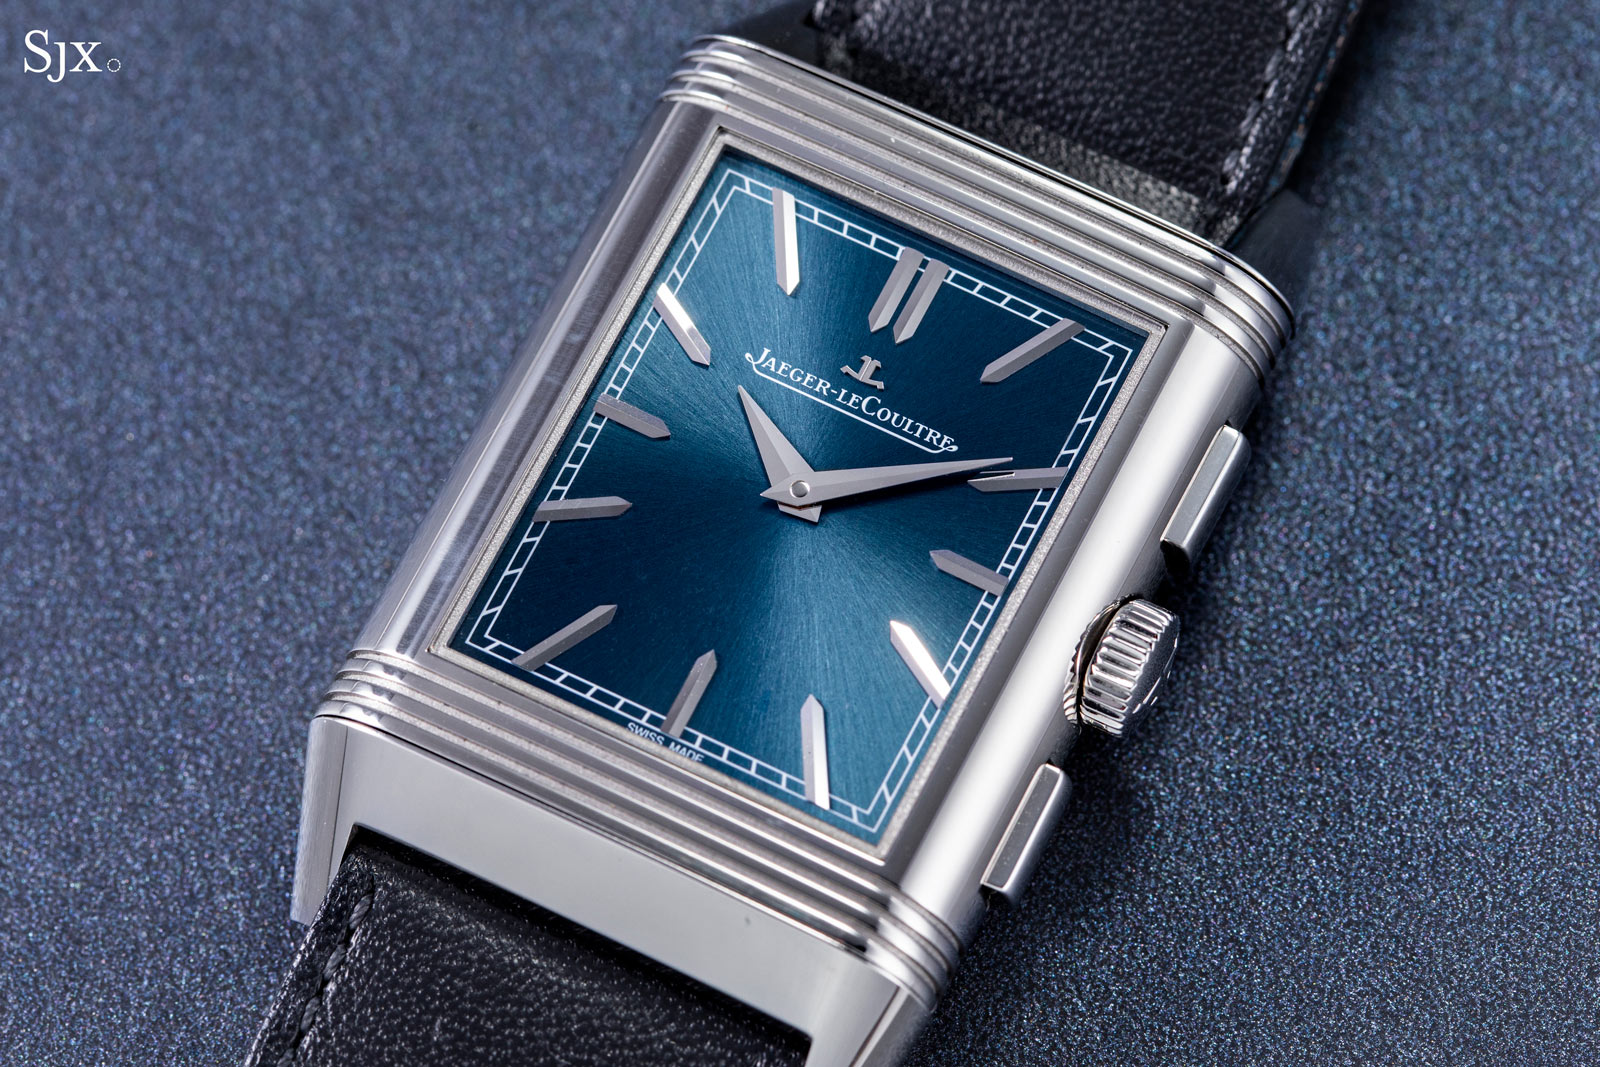 Hands On: The Jaeger-LeCoultre Reverso Tribute Chronograph | SJX Watches